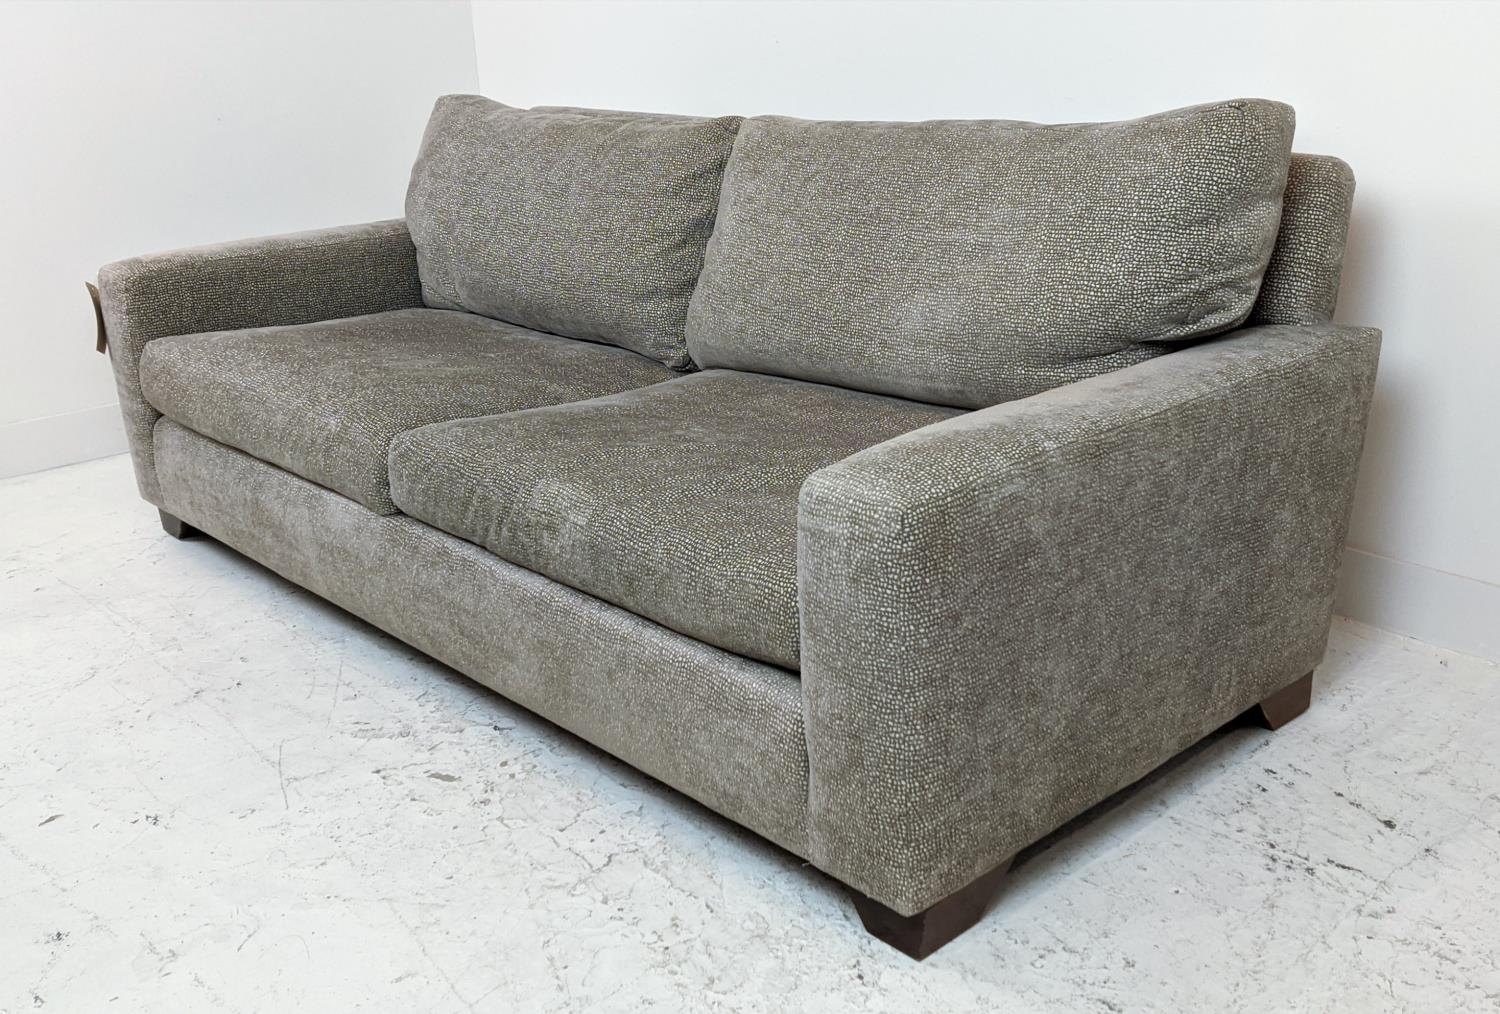 KINGCOME TEXAS SOFA, two seater, in patterned light brown upholstery, 207cm W x 76cm H x 96cm D. - Image 4 of 7